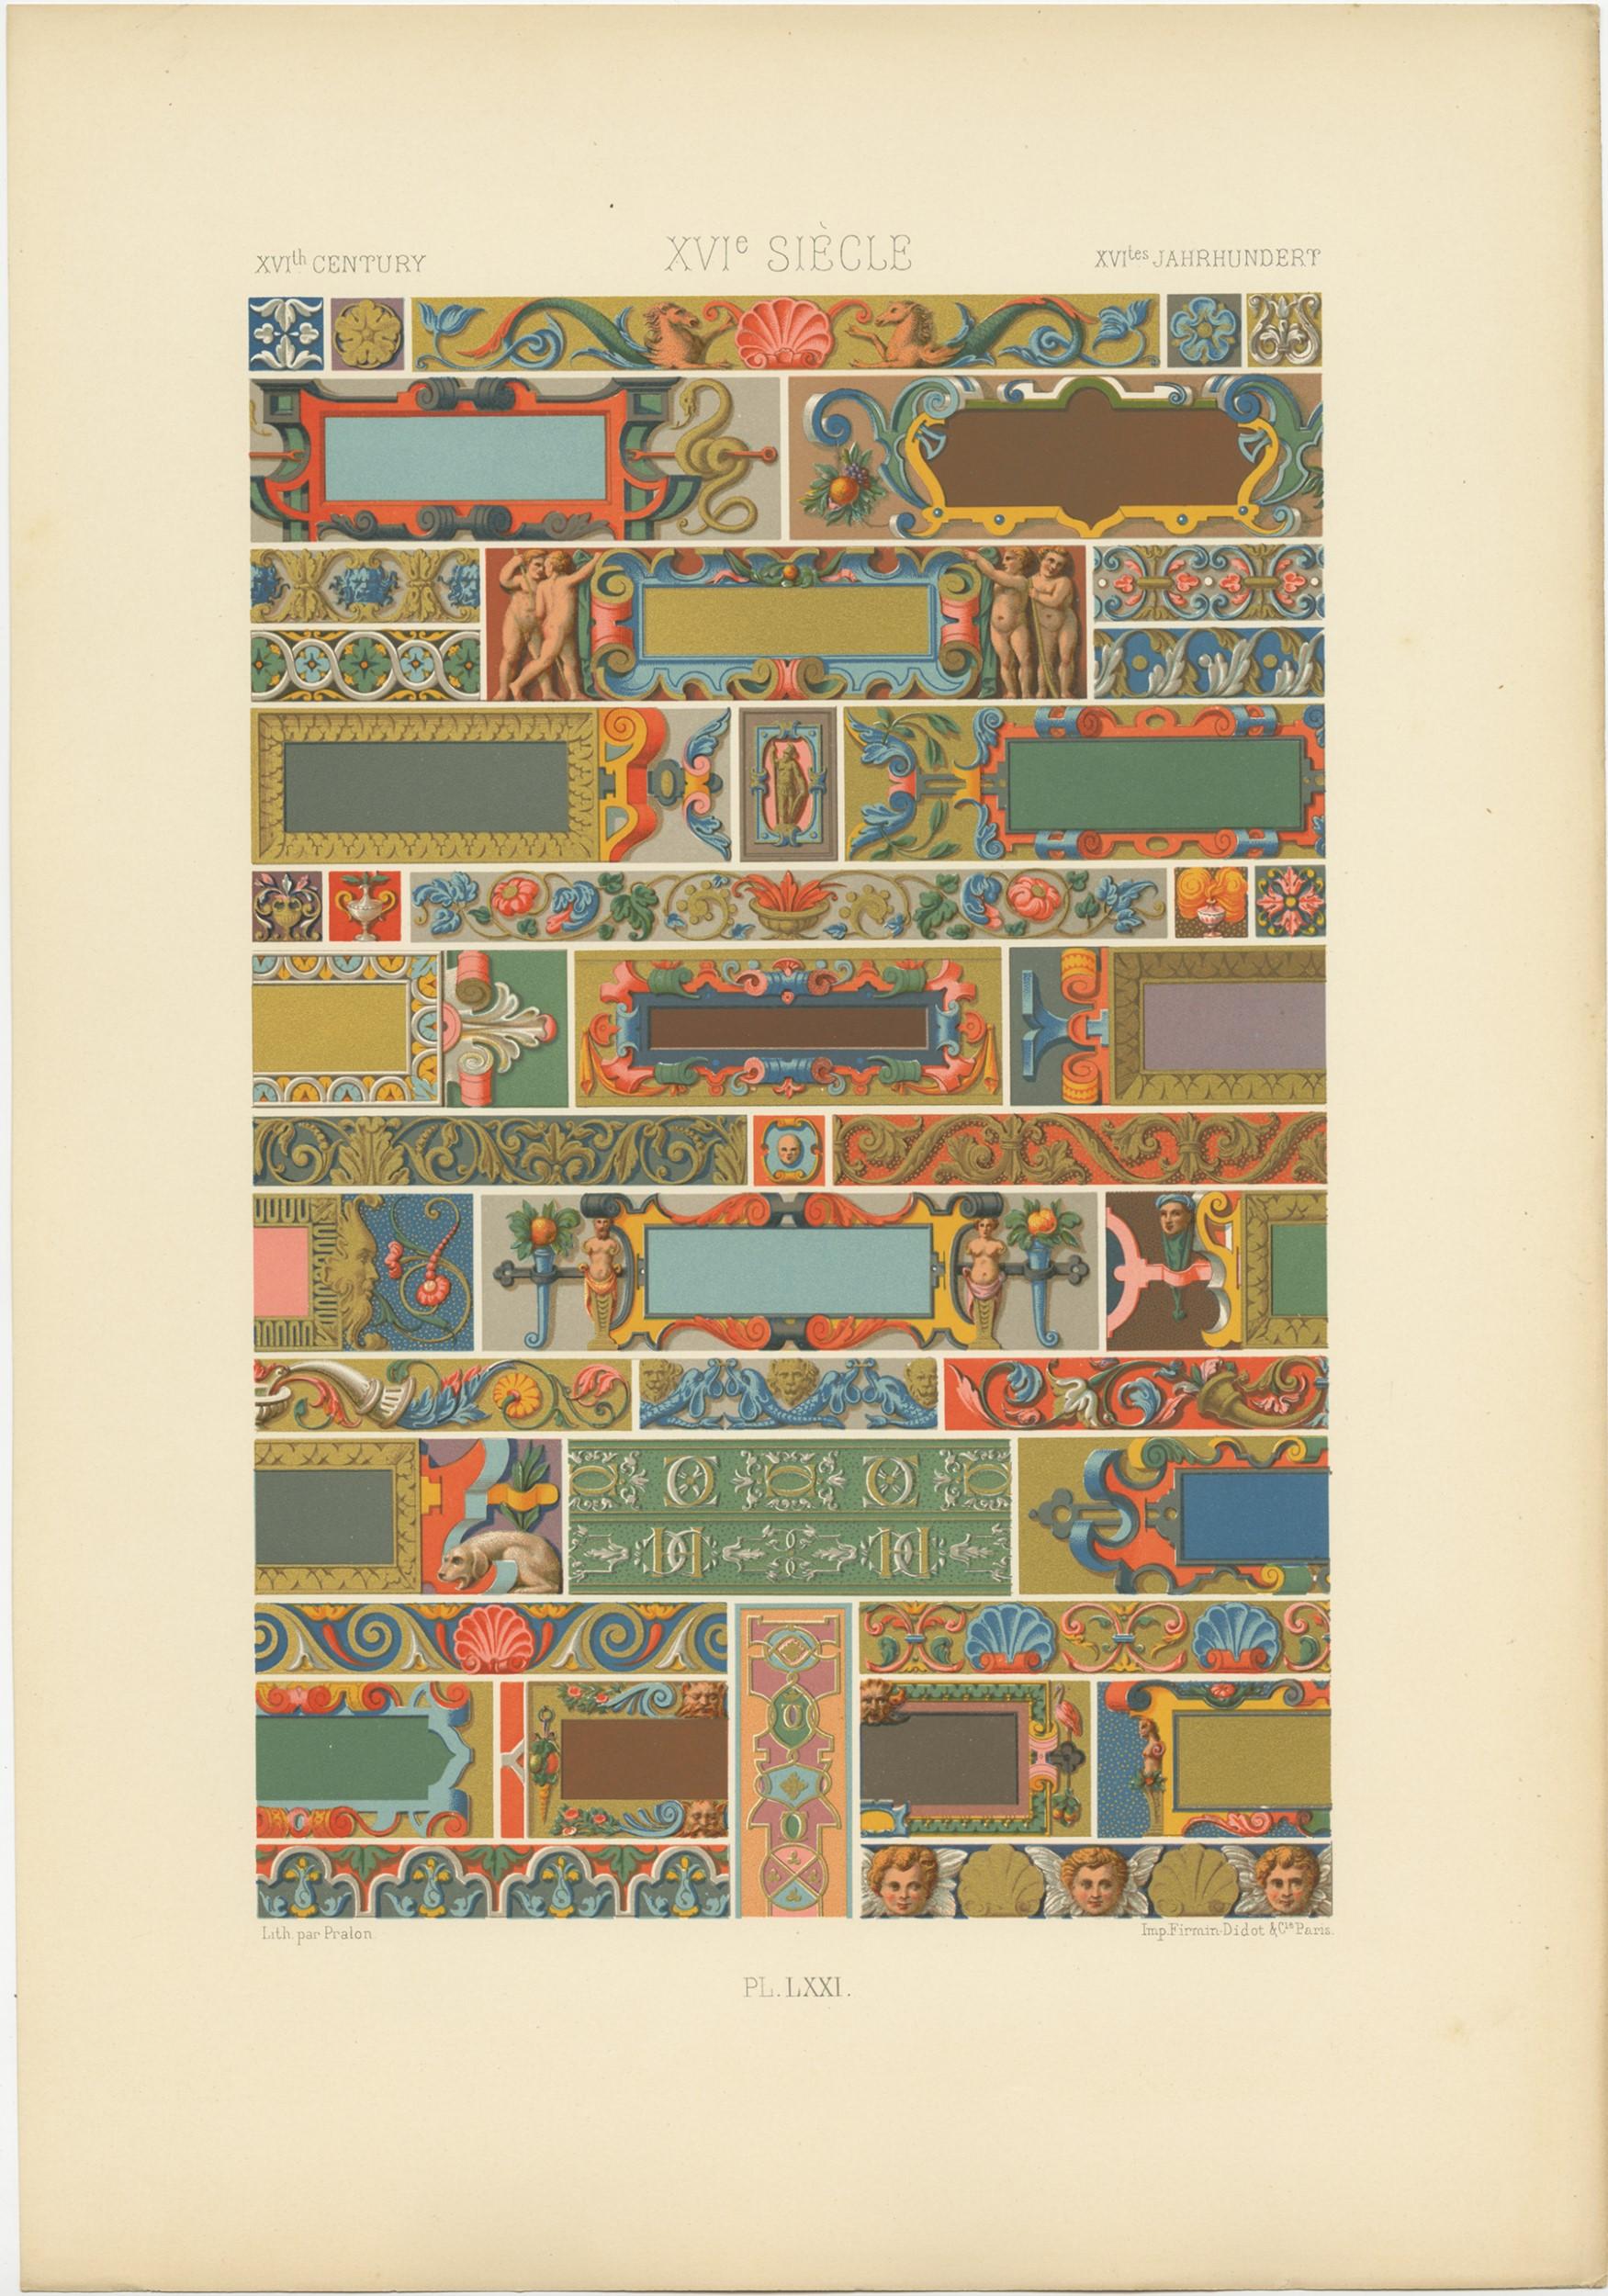 Antique print titled 'XVIth Century - XVIe Siécle - XVItes Jahrhundert'. Chromolithograph of XVIth Century ornaments and decorative arts. This print originates from 'l'Ornement Polychrome' by Auguste Racinet. Published circa 1890.